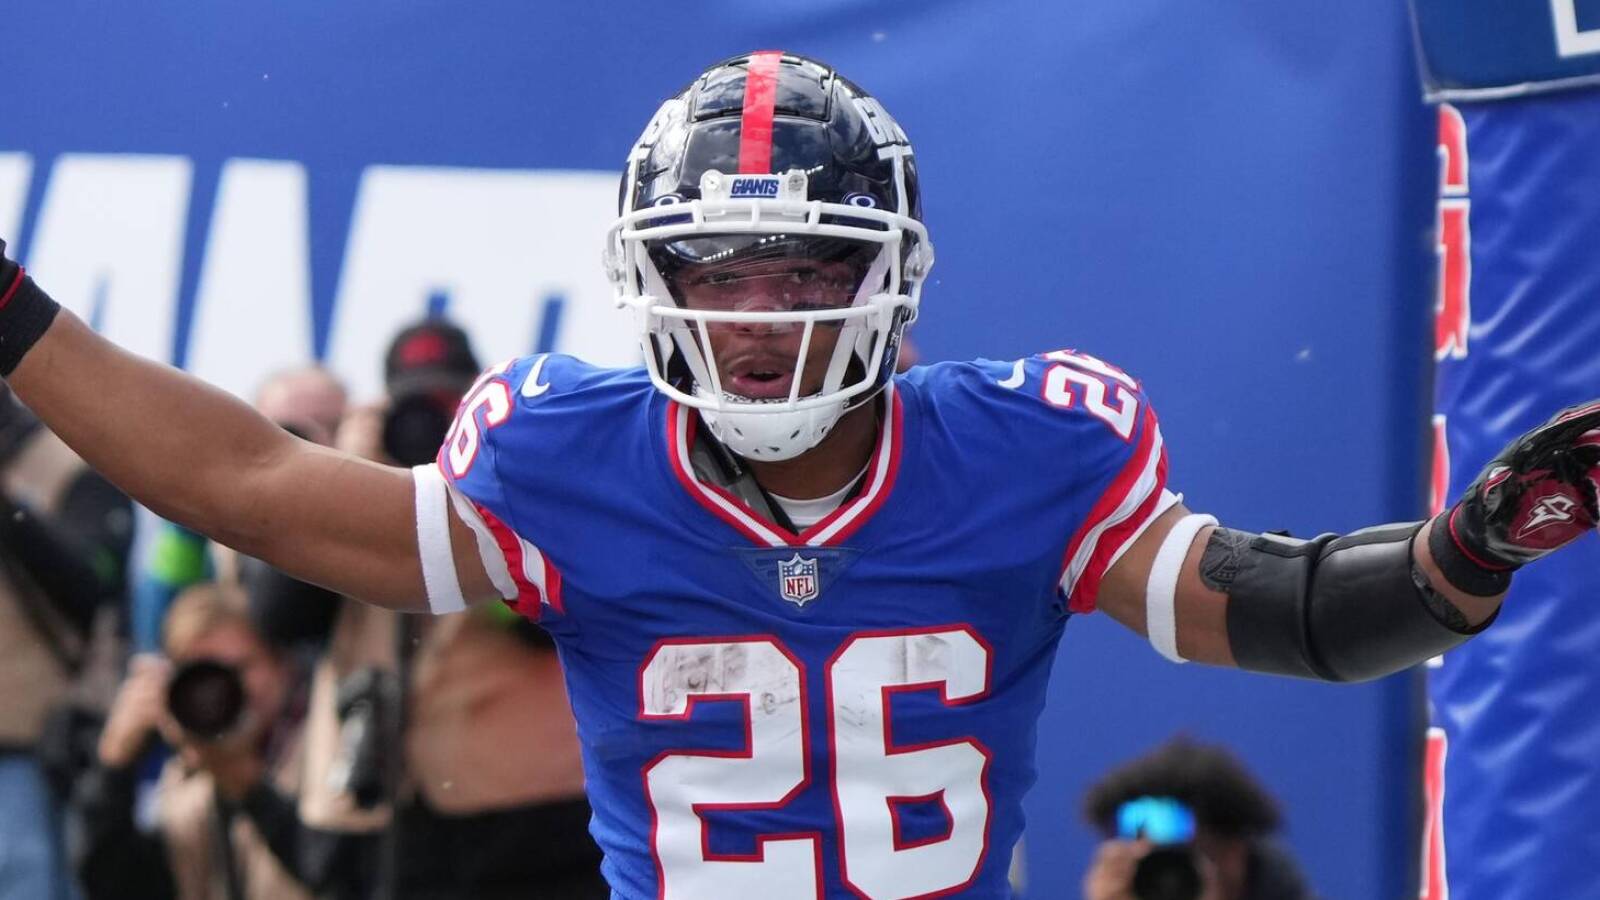 Hall of Fame RB praises Saquon Barkley amid deal with Eagles